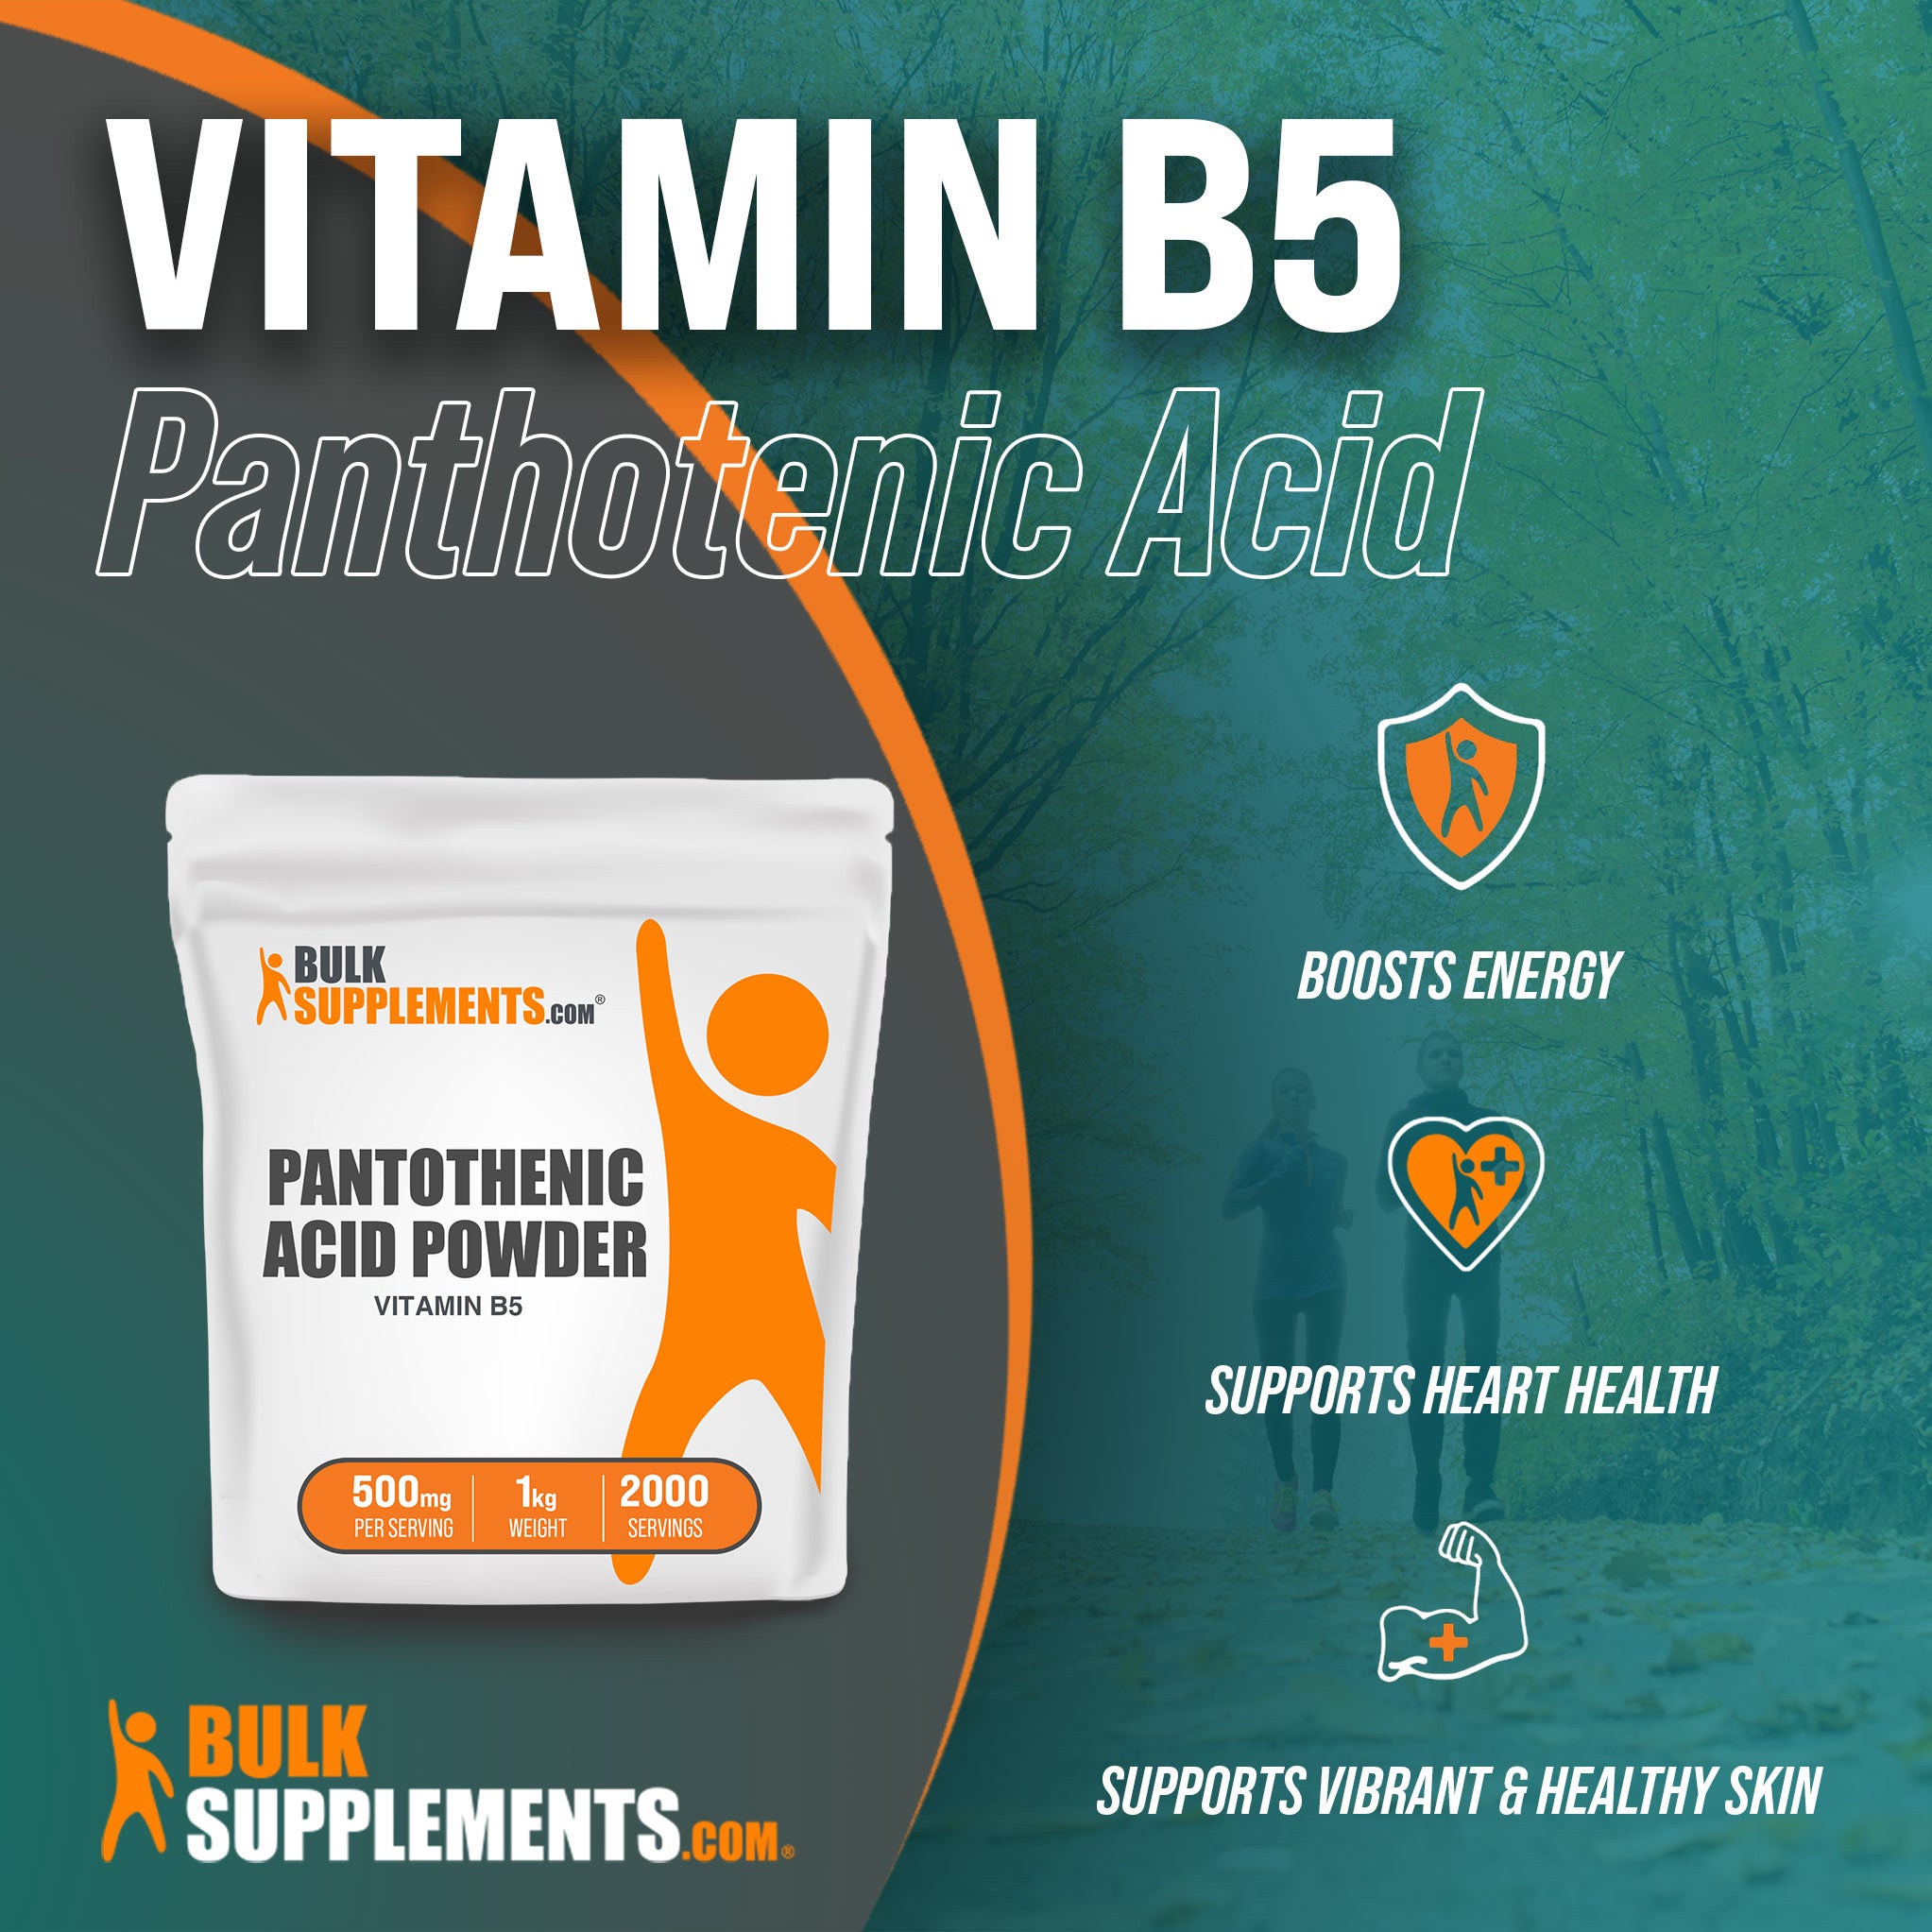 Benefits of Vitamin B5 Pantothenic Acid: boosts energy, supports heart health, supports vibrant and healthy skin